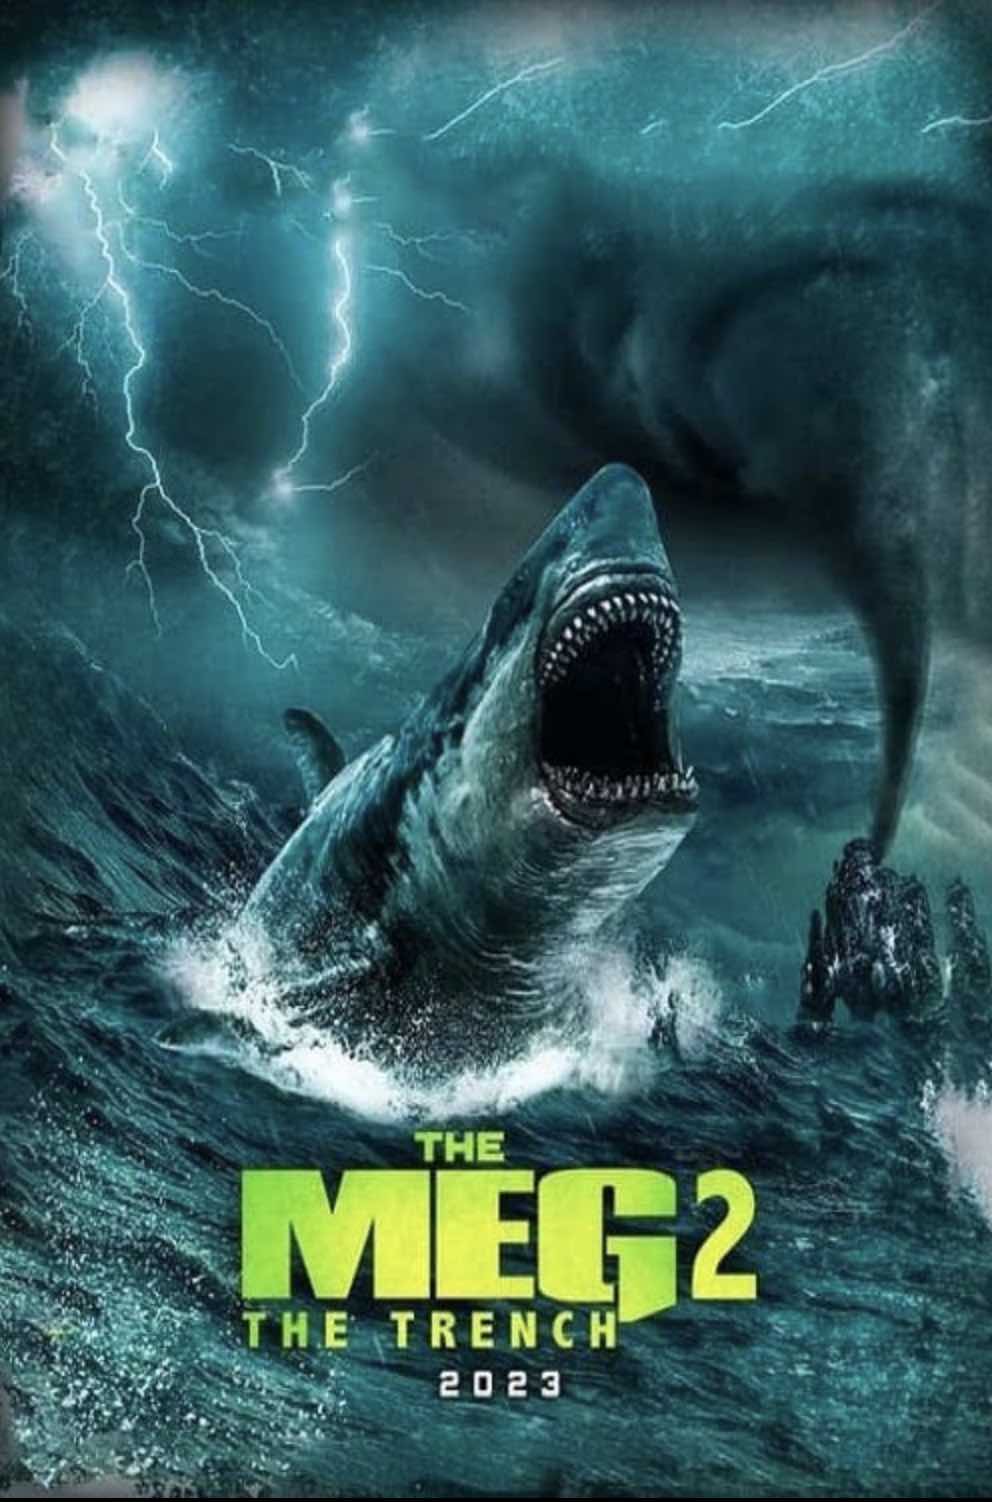 movie review of meg 2